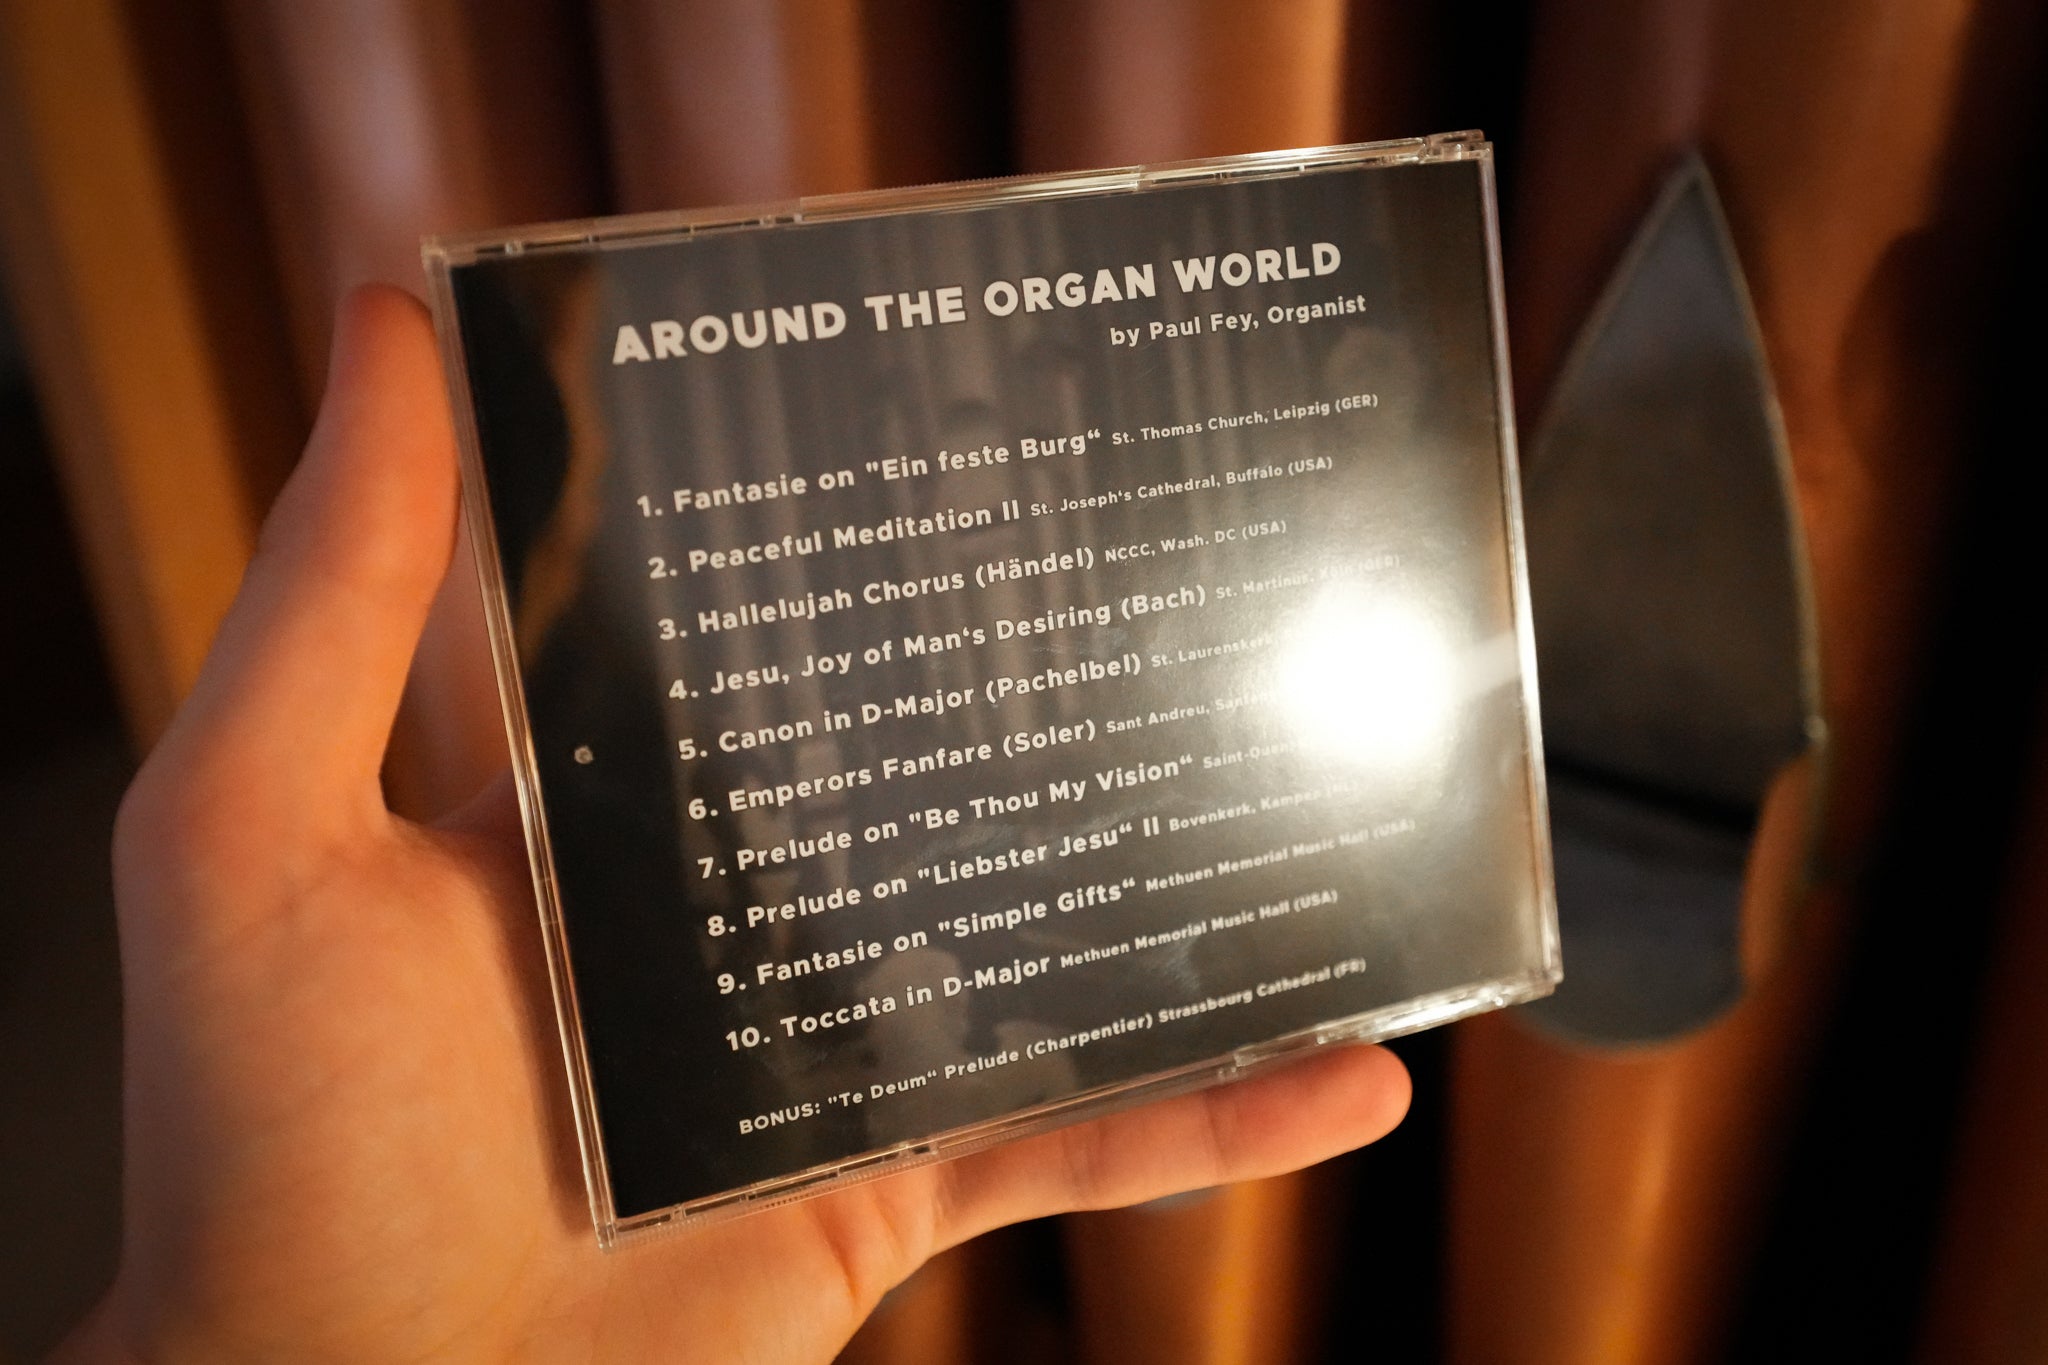 Paul Fey Organist Debut CD  Around the Organ World include 10 pieces of organ music